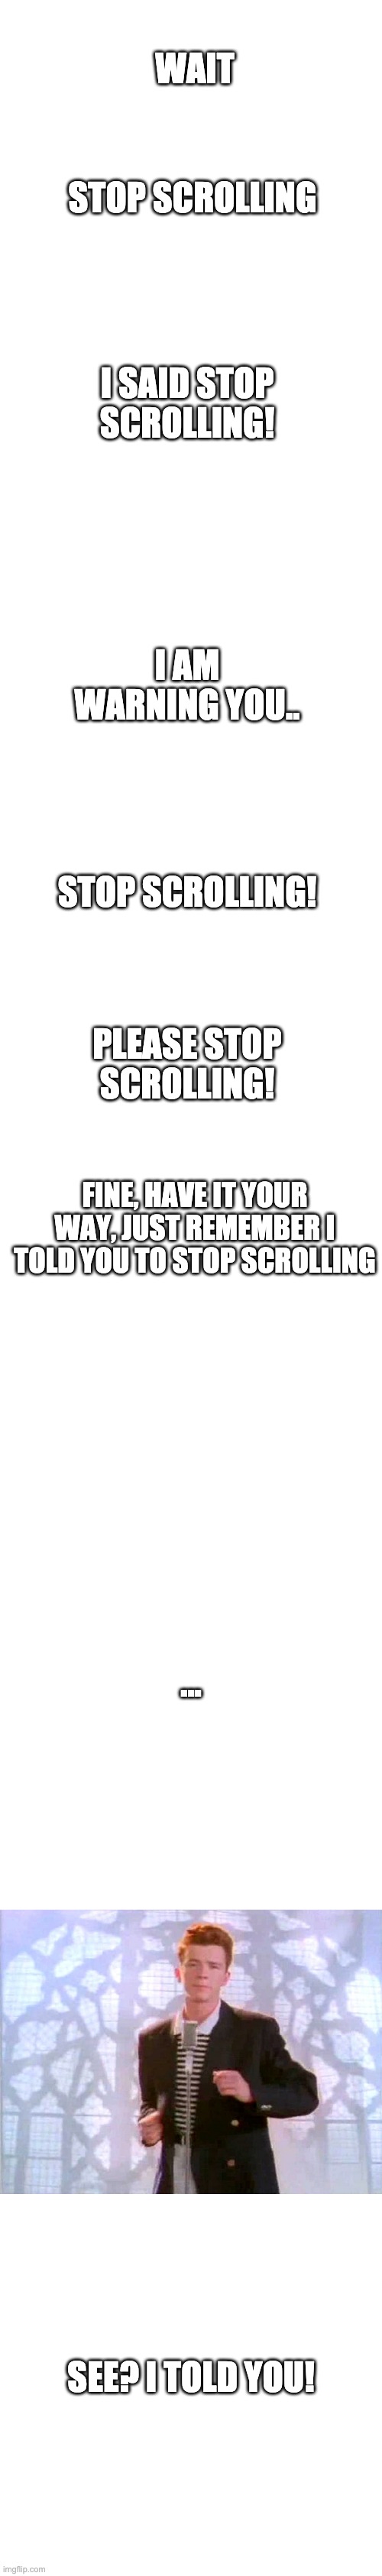 hmm | WAIT; STOP SCROLLING; I SAID STOP SCROLLING! I AM WARNING YOU.. STOP SCROLLING! PLEASE STOP SCROLLING! FINE, HAVE IT YOUR WAY, JUST REMEMBER I TOLD YOU TO STOP SCROLLING; ... SEE? I TOLD YOU! | image tagged in memes,blank transparent square | made w/ Imgflip meme maker